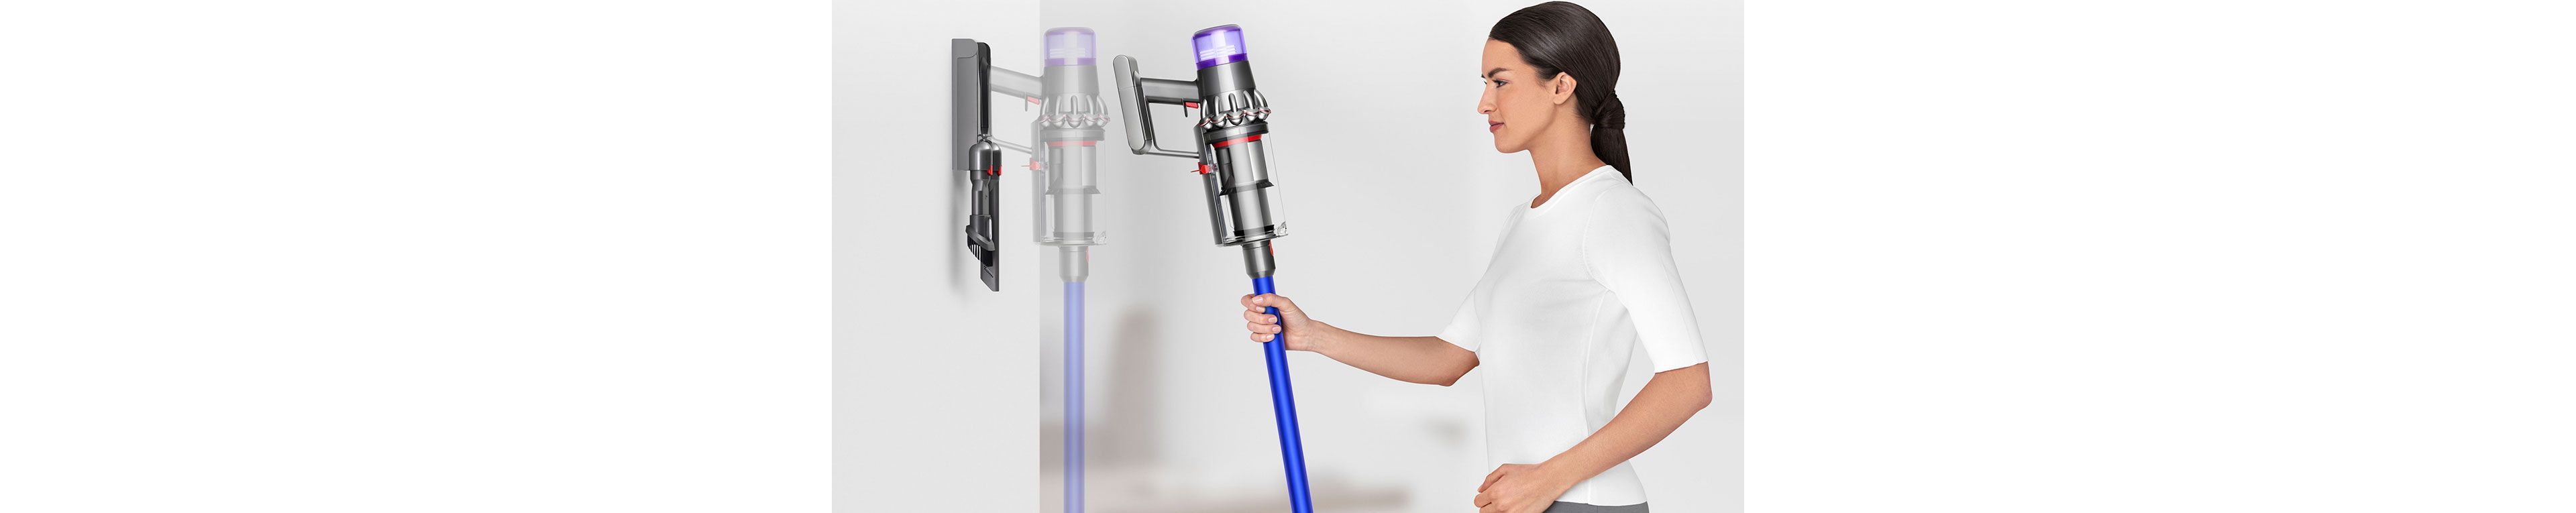 Dyson V11 vacuum cleaner being placed into wall mounted dock